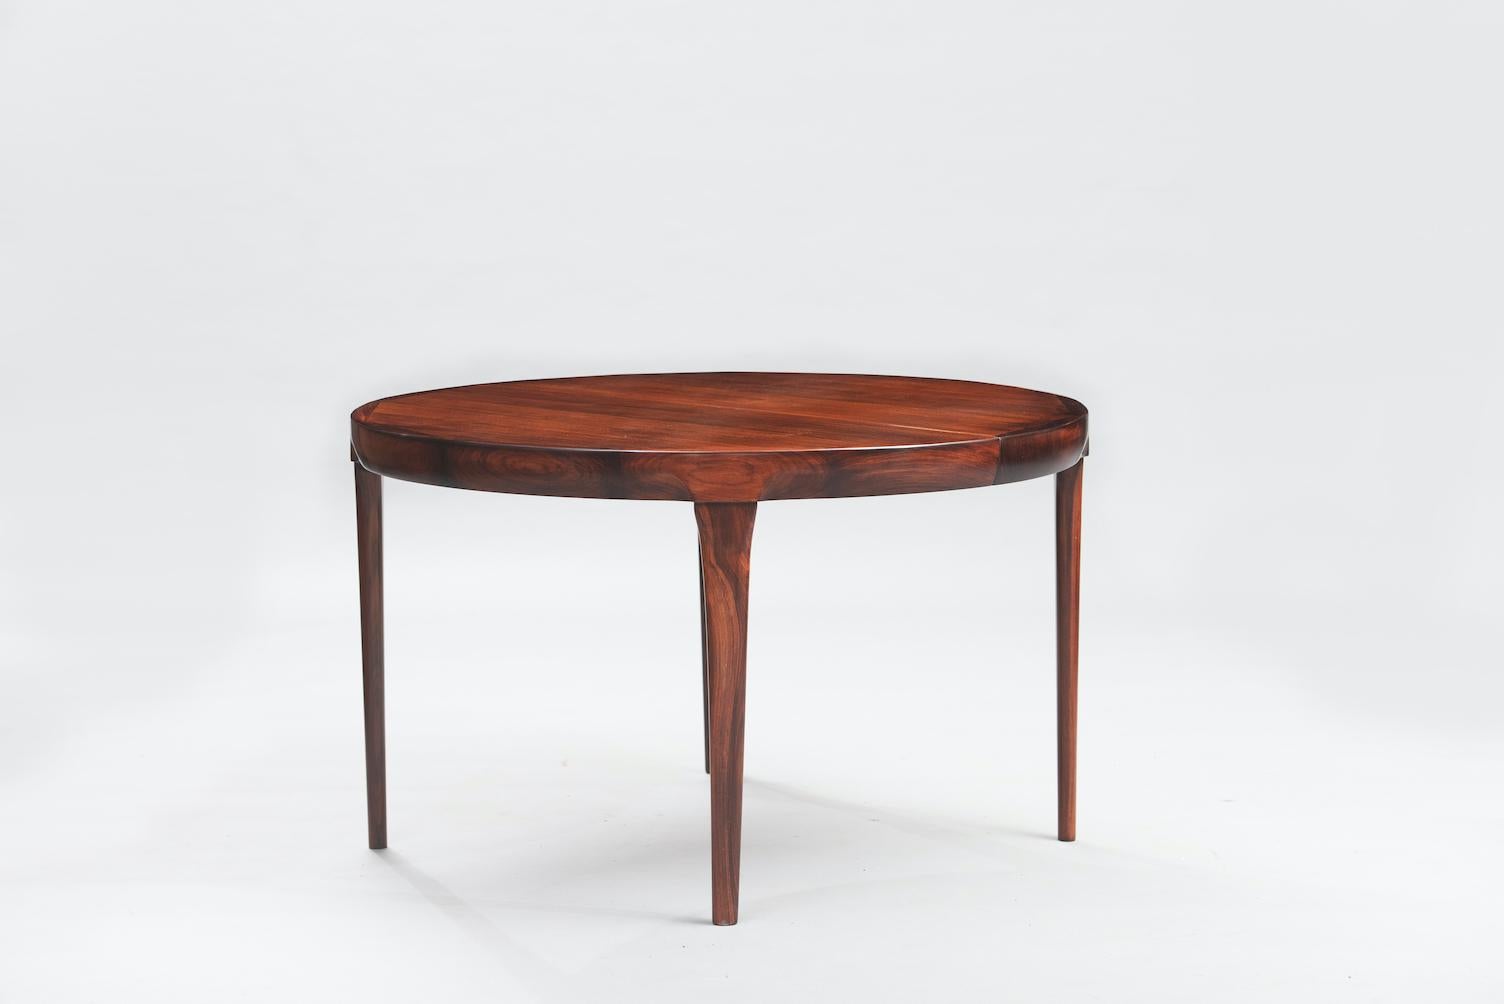 Ib Kofod Larsen rosewood extendable dining table.
Measures: Closed (round) 115 cm
Open (3 leaves) 265 cm.